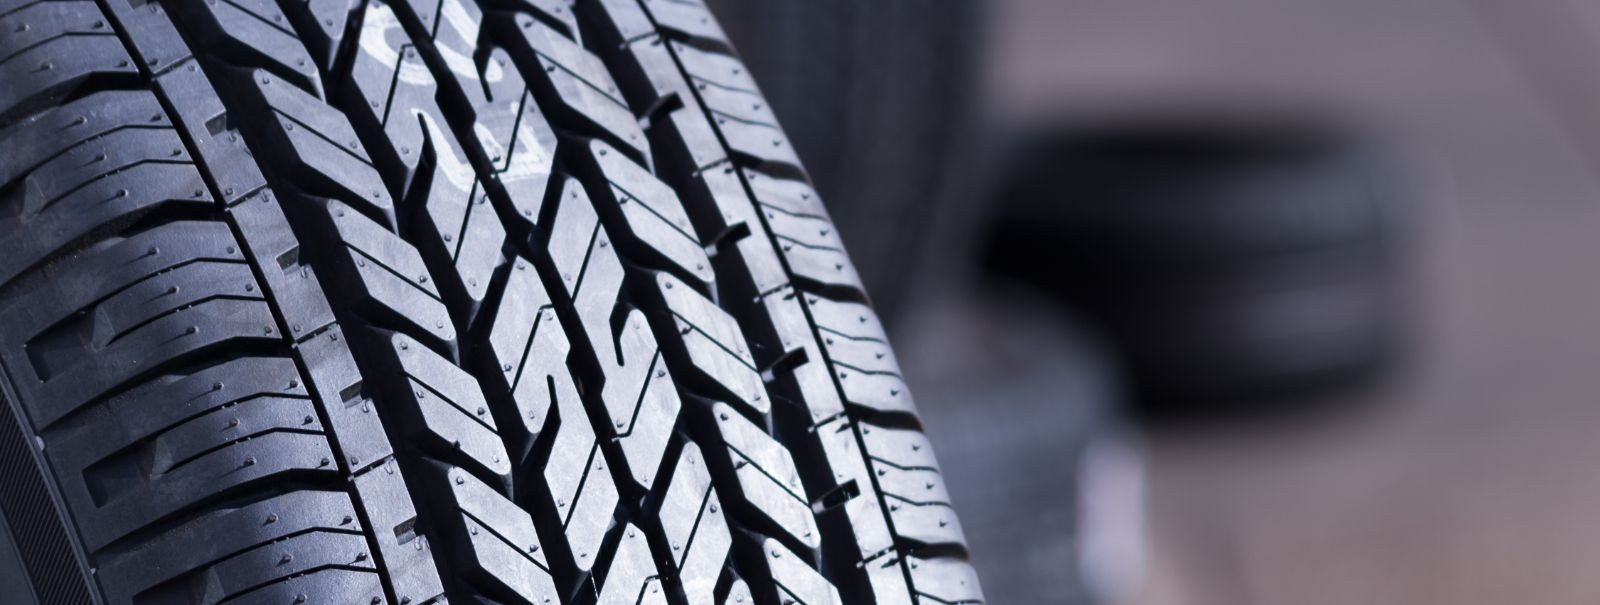 When it comes to vehicle maintenance, choosing the right type of tyres is crucial for ensuring safety and performance on the road. Tyres are not just a single c